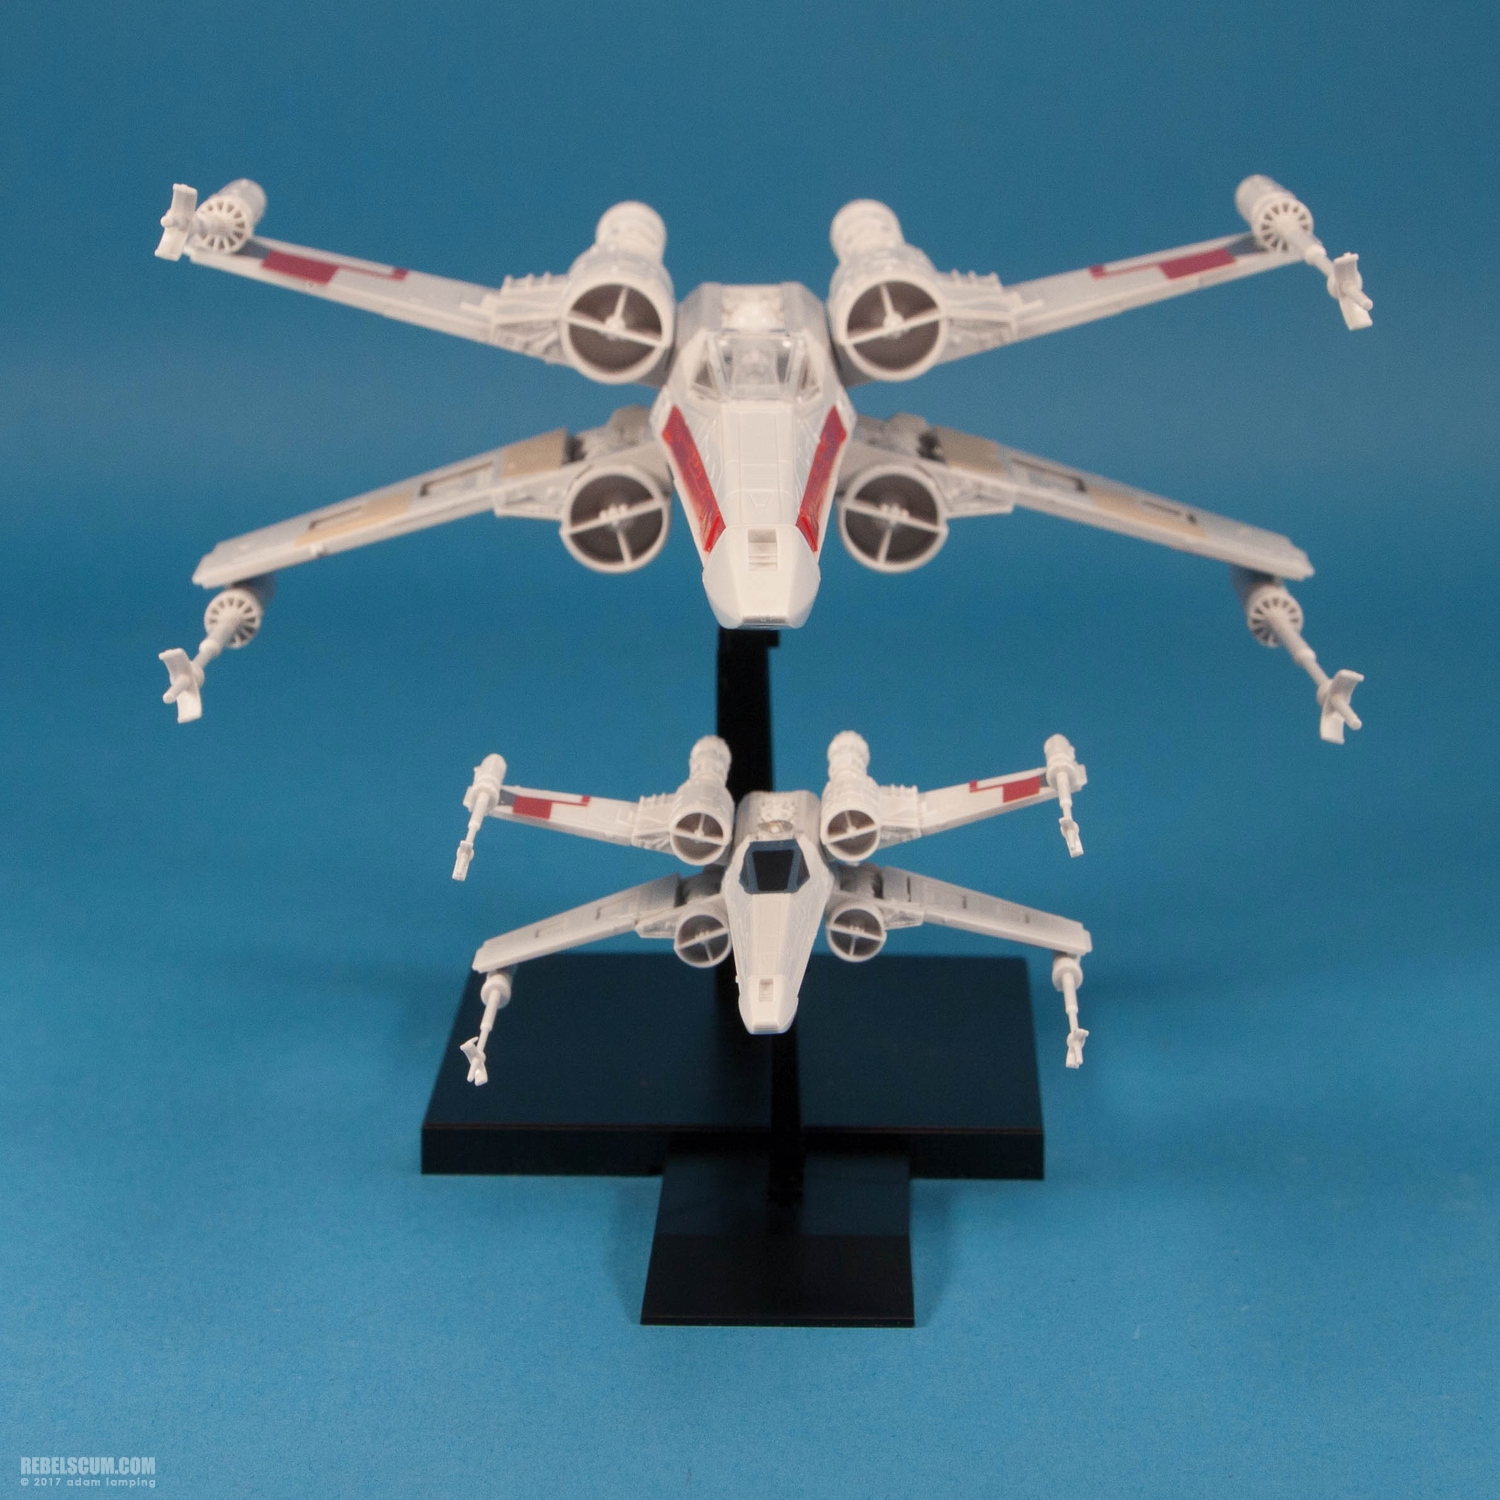 bandai-red-squadron-x-wing-starfighter-scale-model-kit-029.jpg